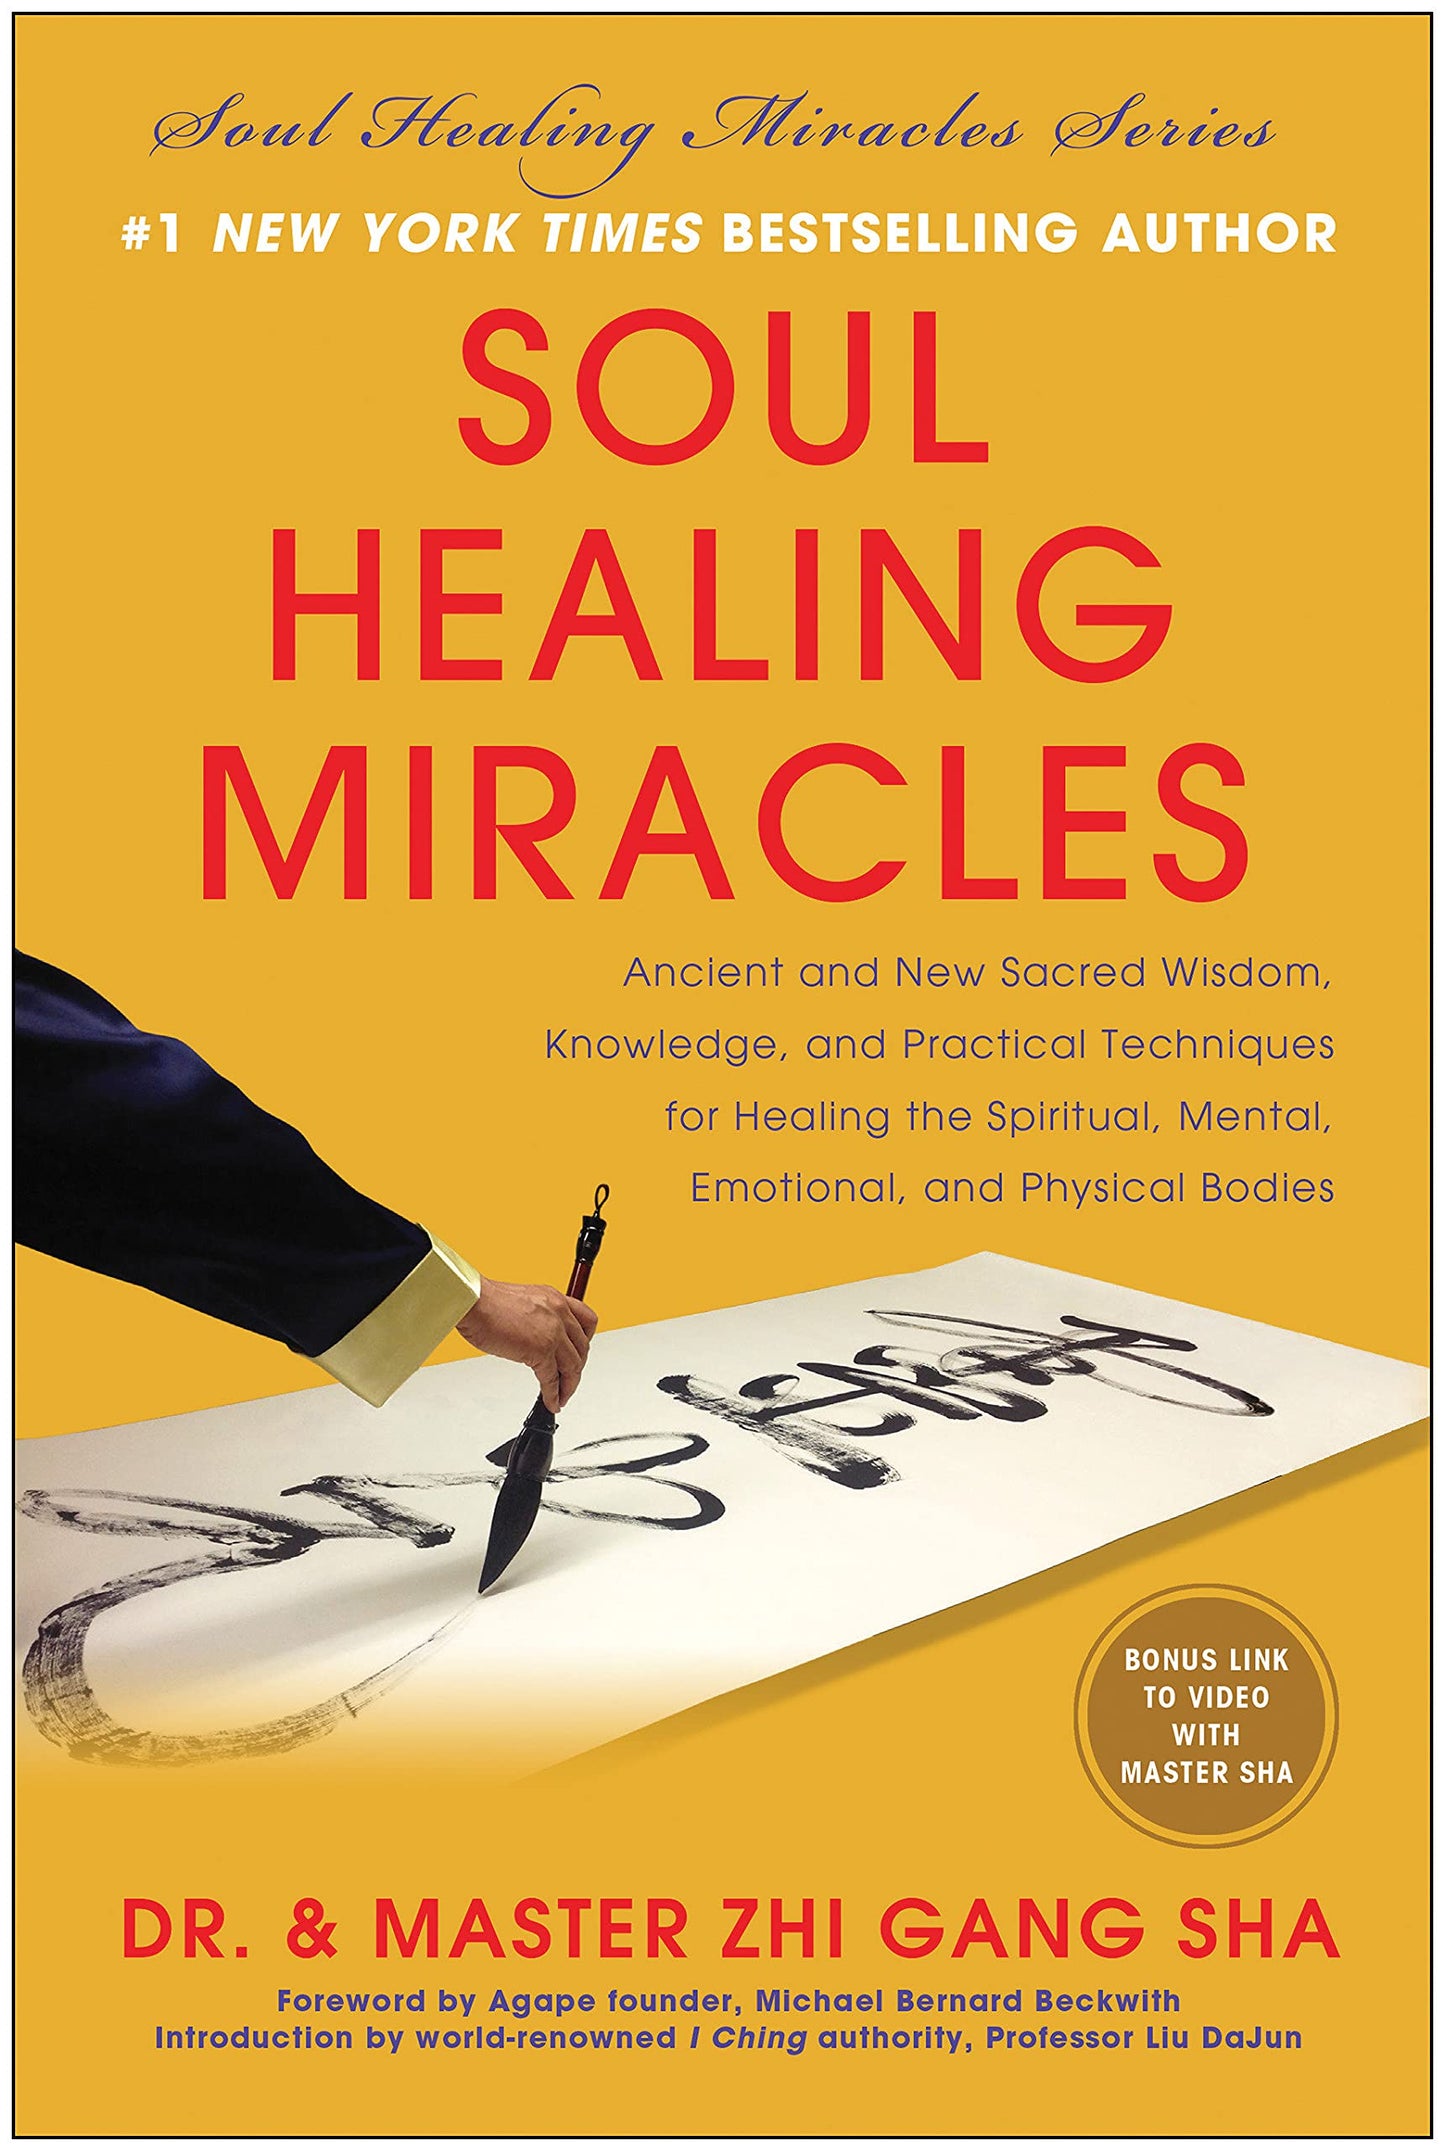 Soul Healing Miracles: Ancient and New Sacred Wisdom, Knowledge, and Practical Techniques